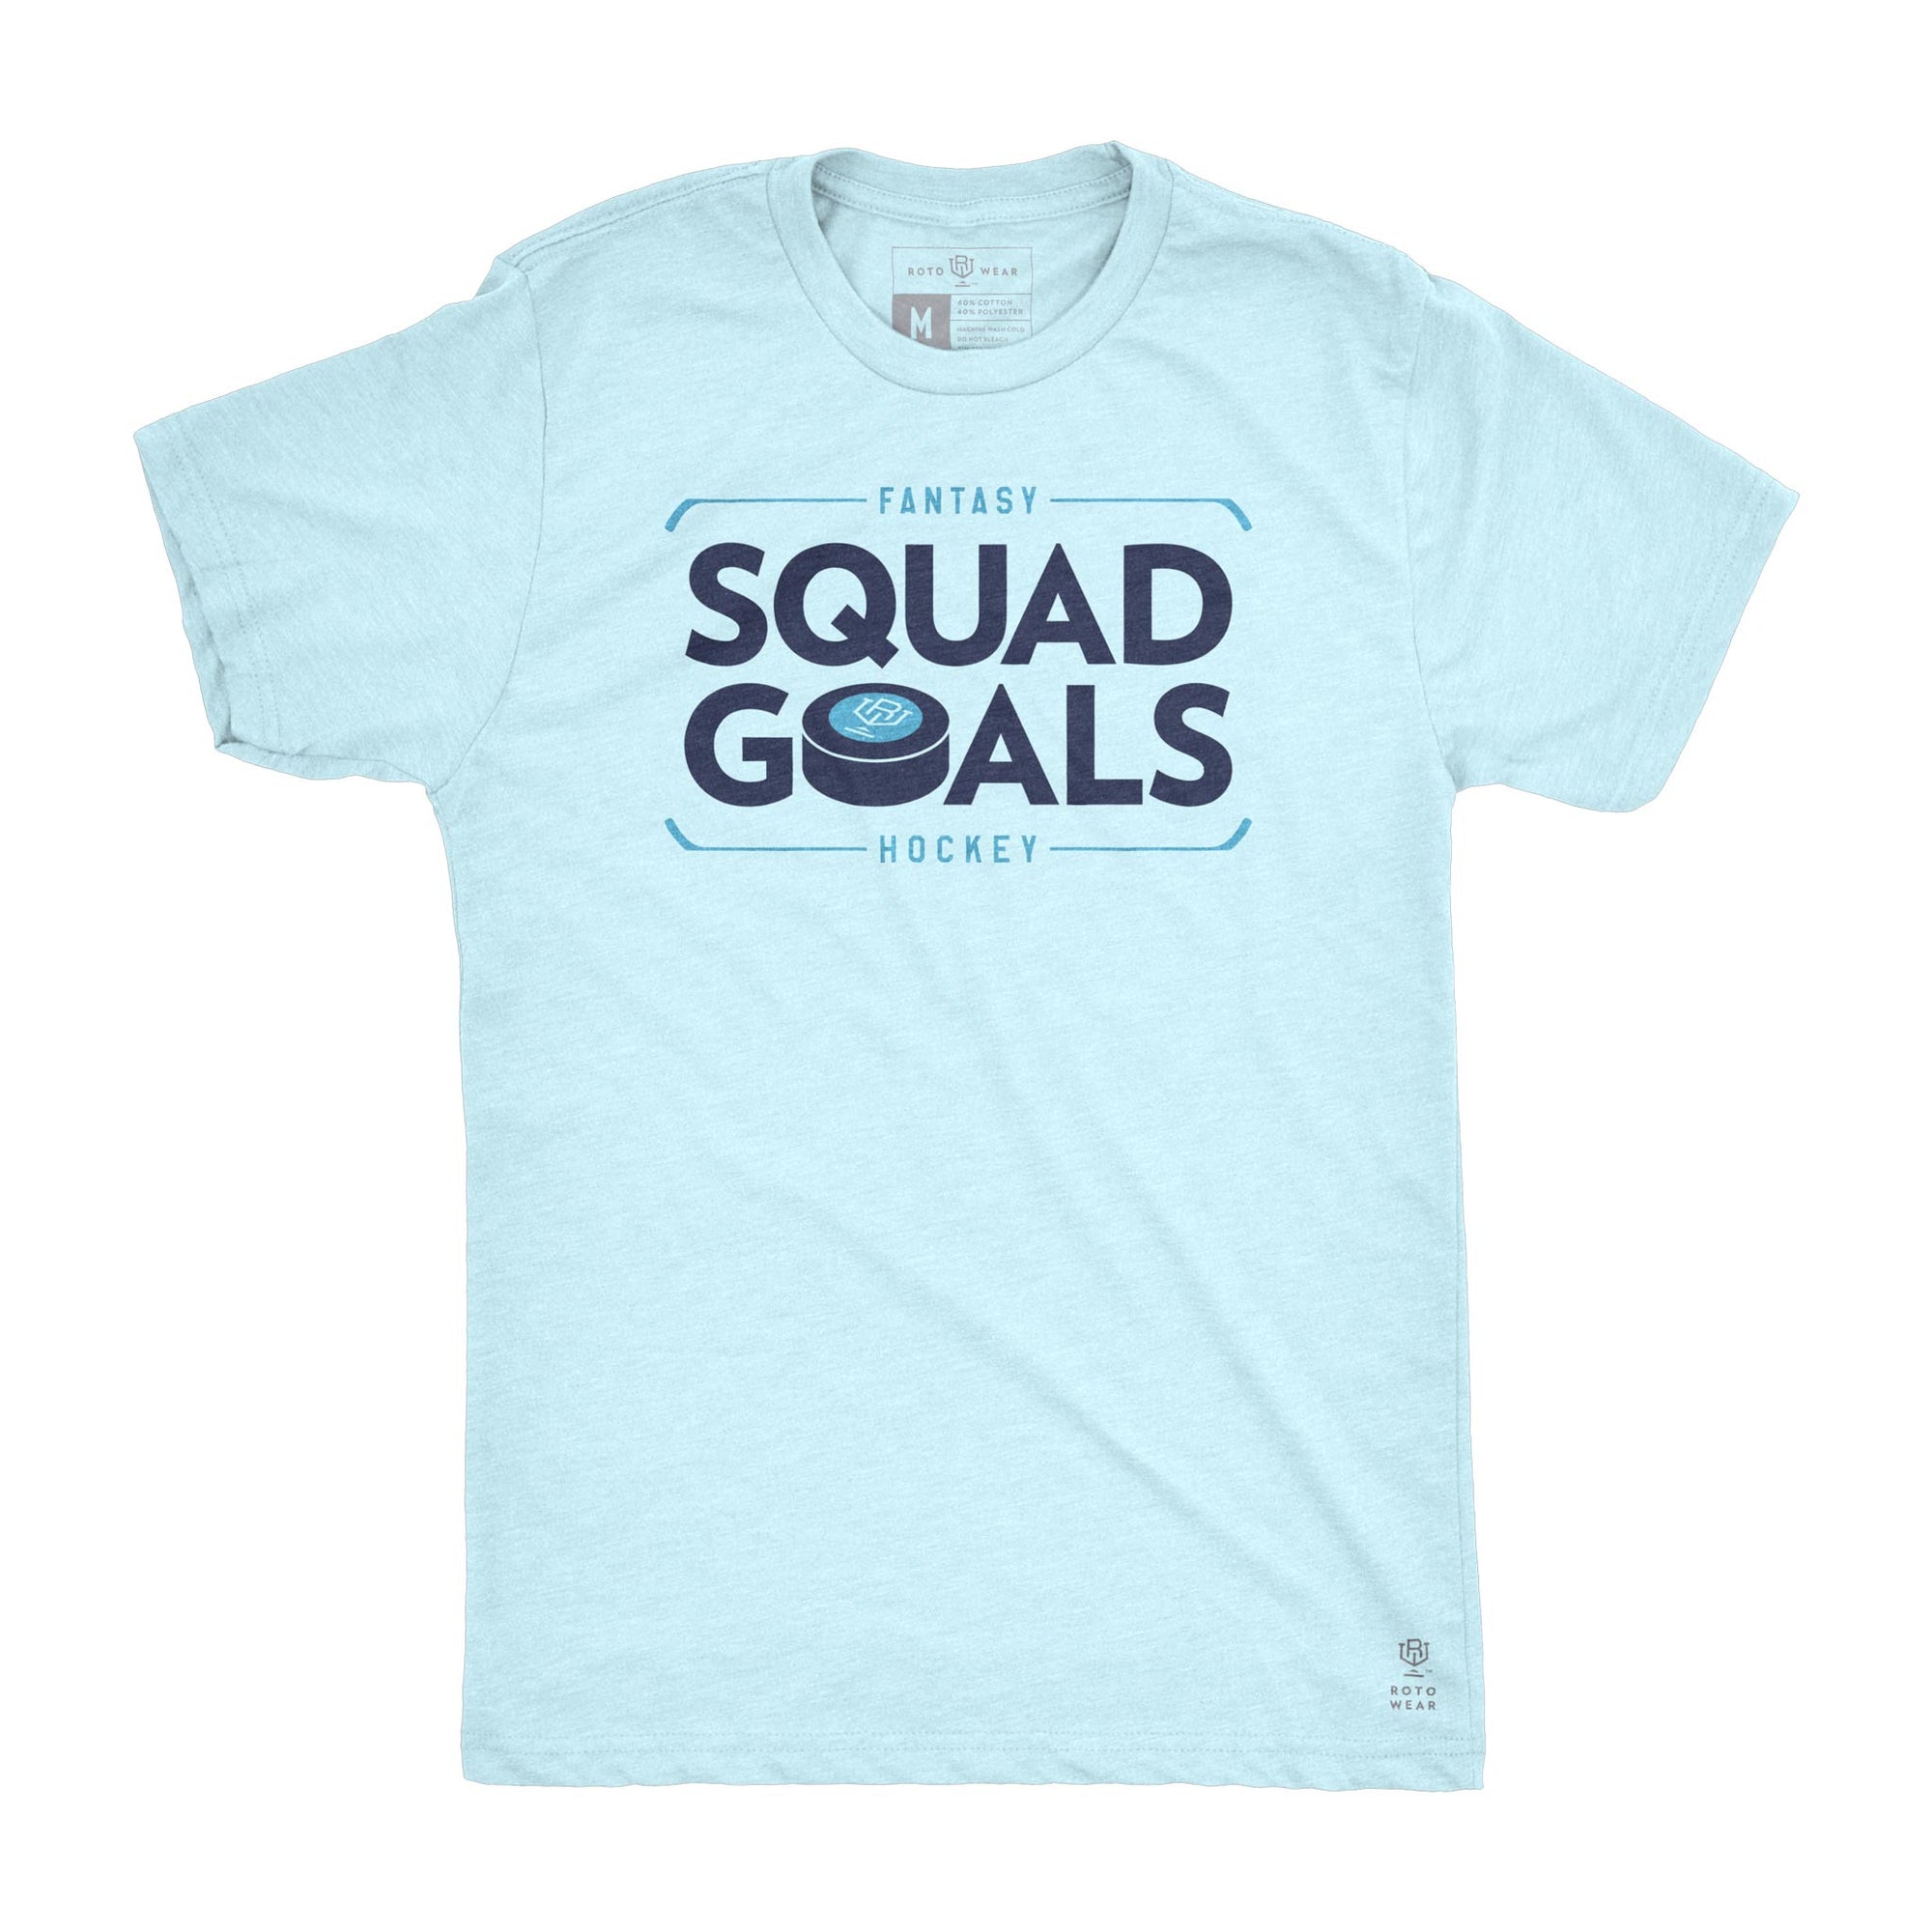 Squad Goals men’s fantasy hockey t-shirt for NHL fans and DraftKings or Fanduel DFS lineups